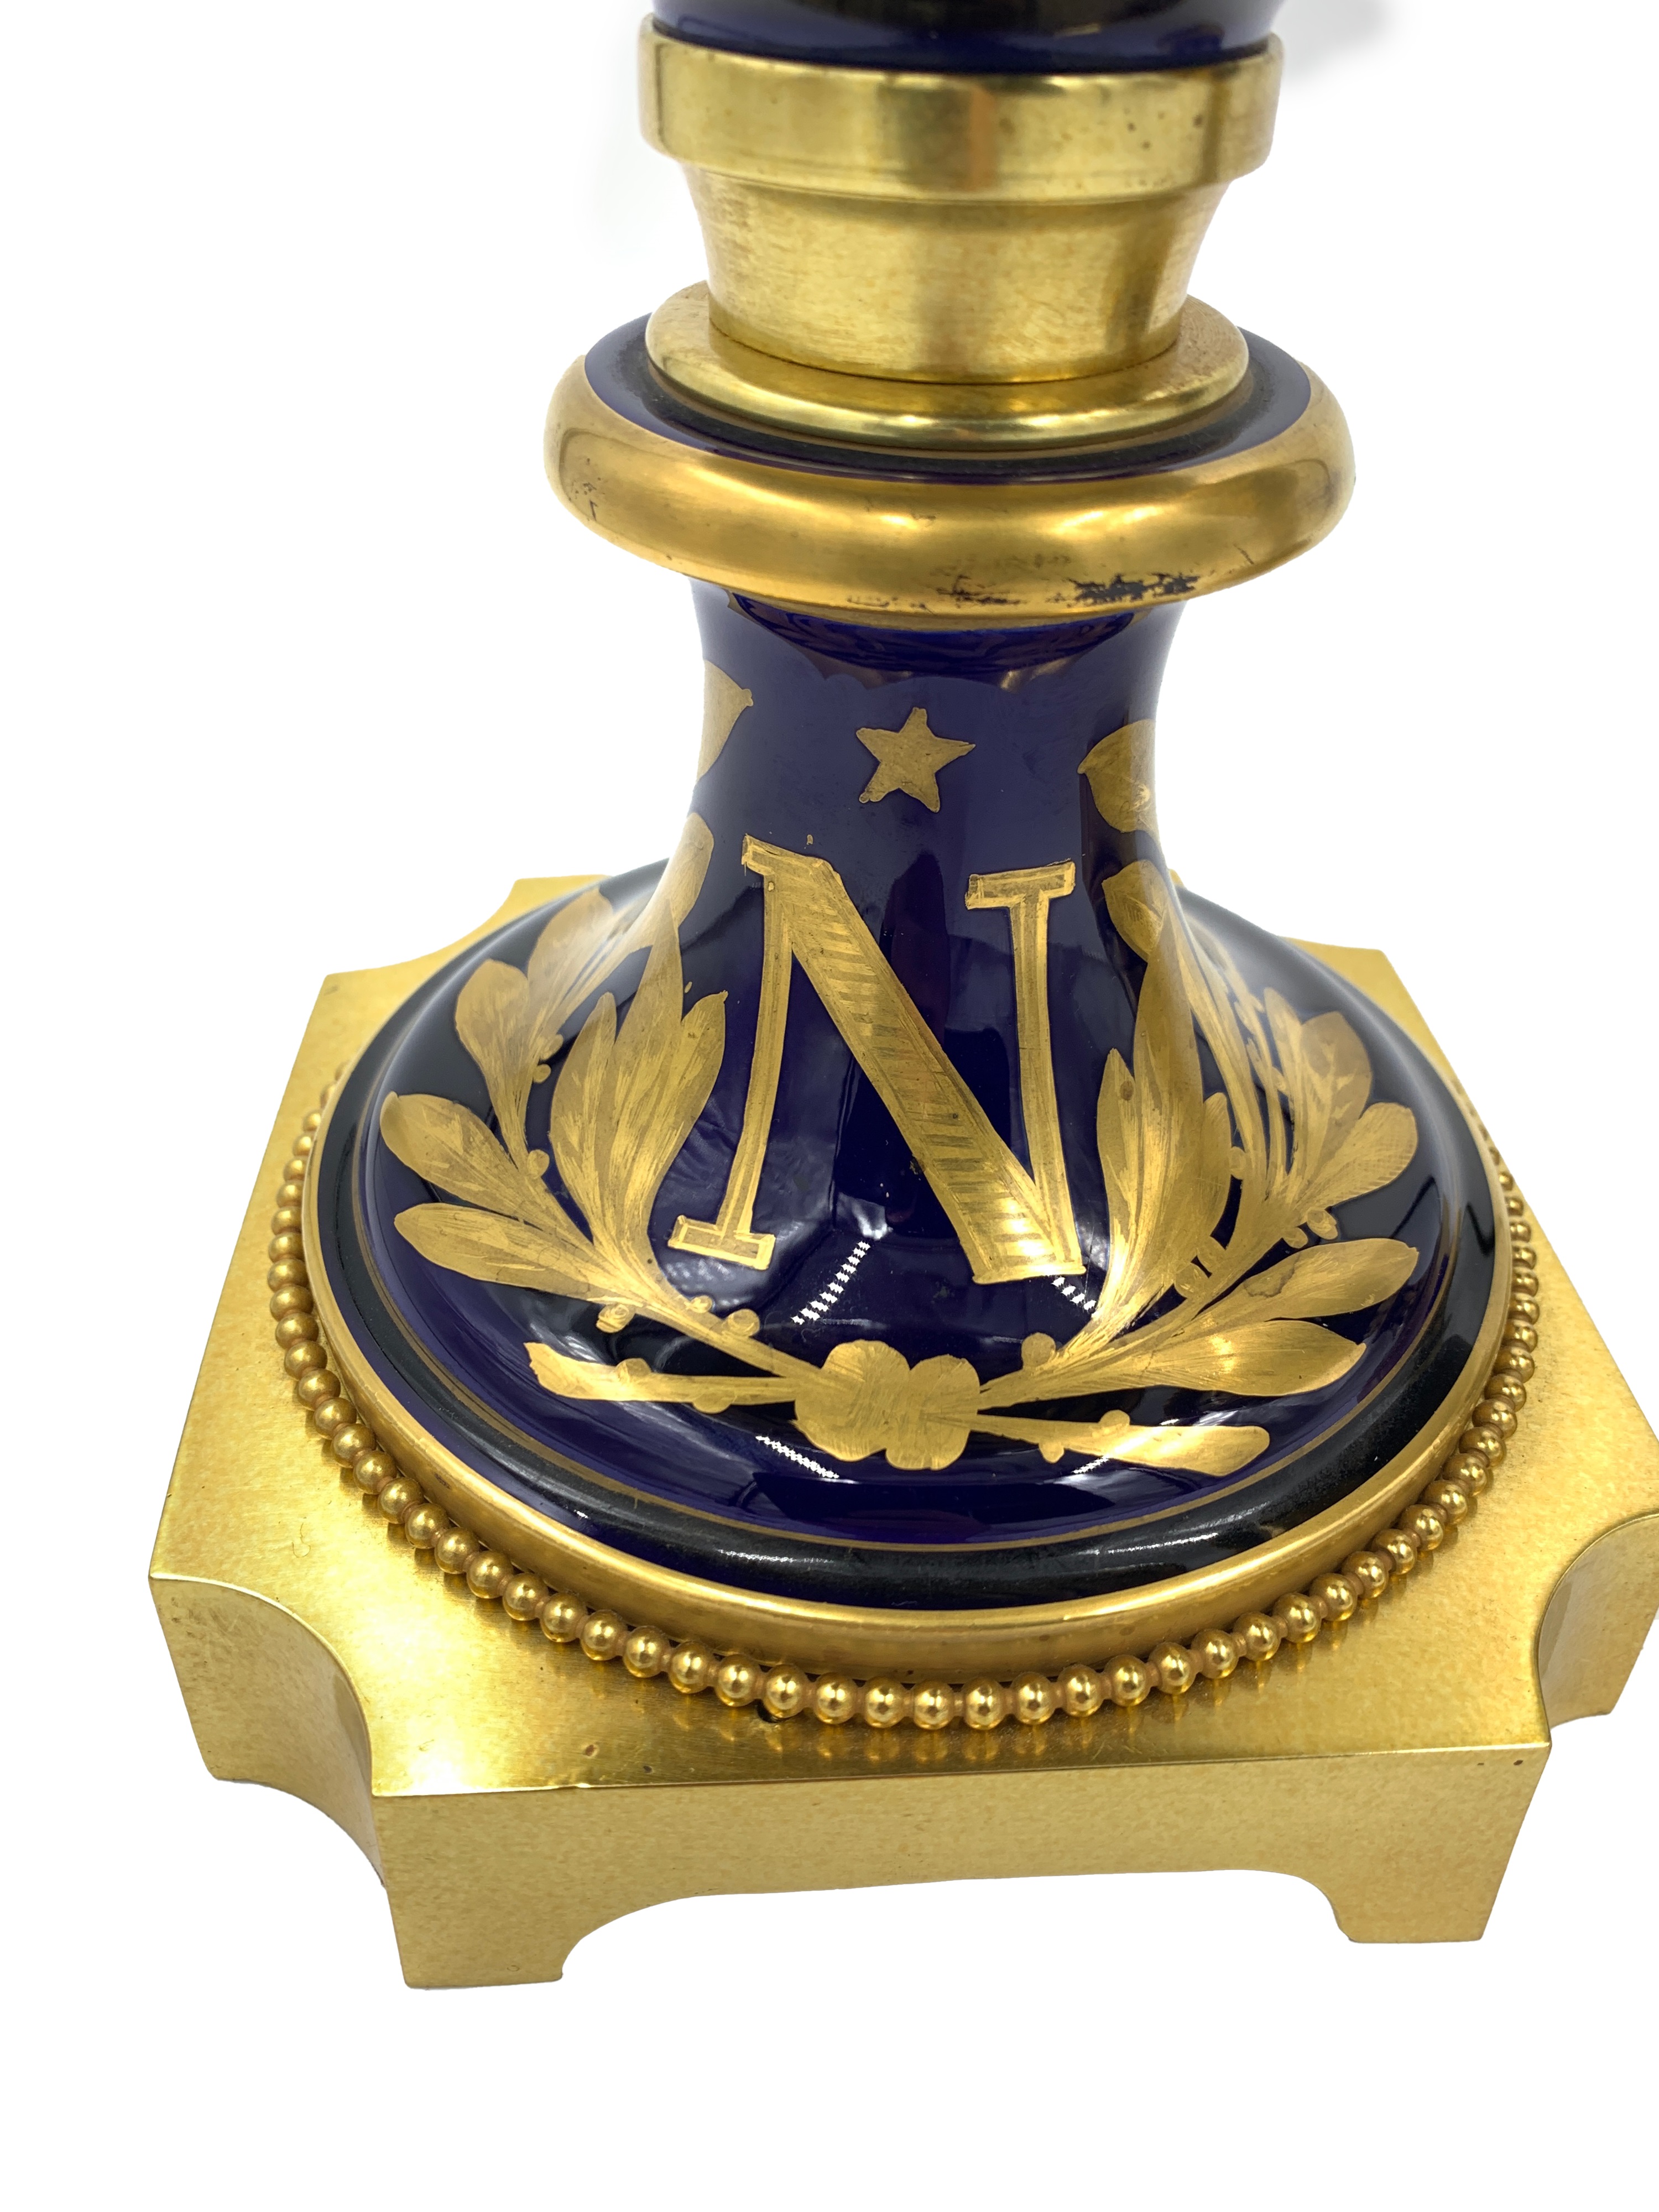 A FINE PAIR OF LATE 19TH / EARLY 20TH CENTURY SEVRES STYLE PORCELAIN NAPOLEON VASES - Image 9 of 14